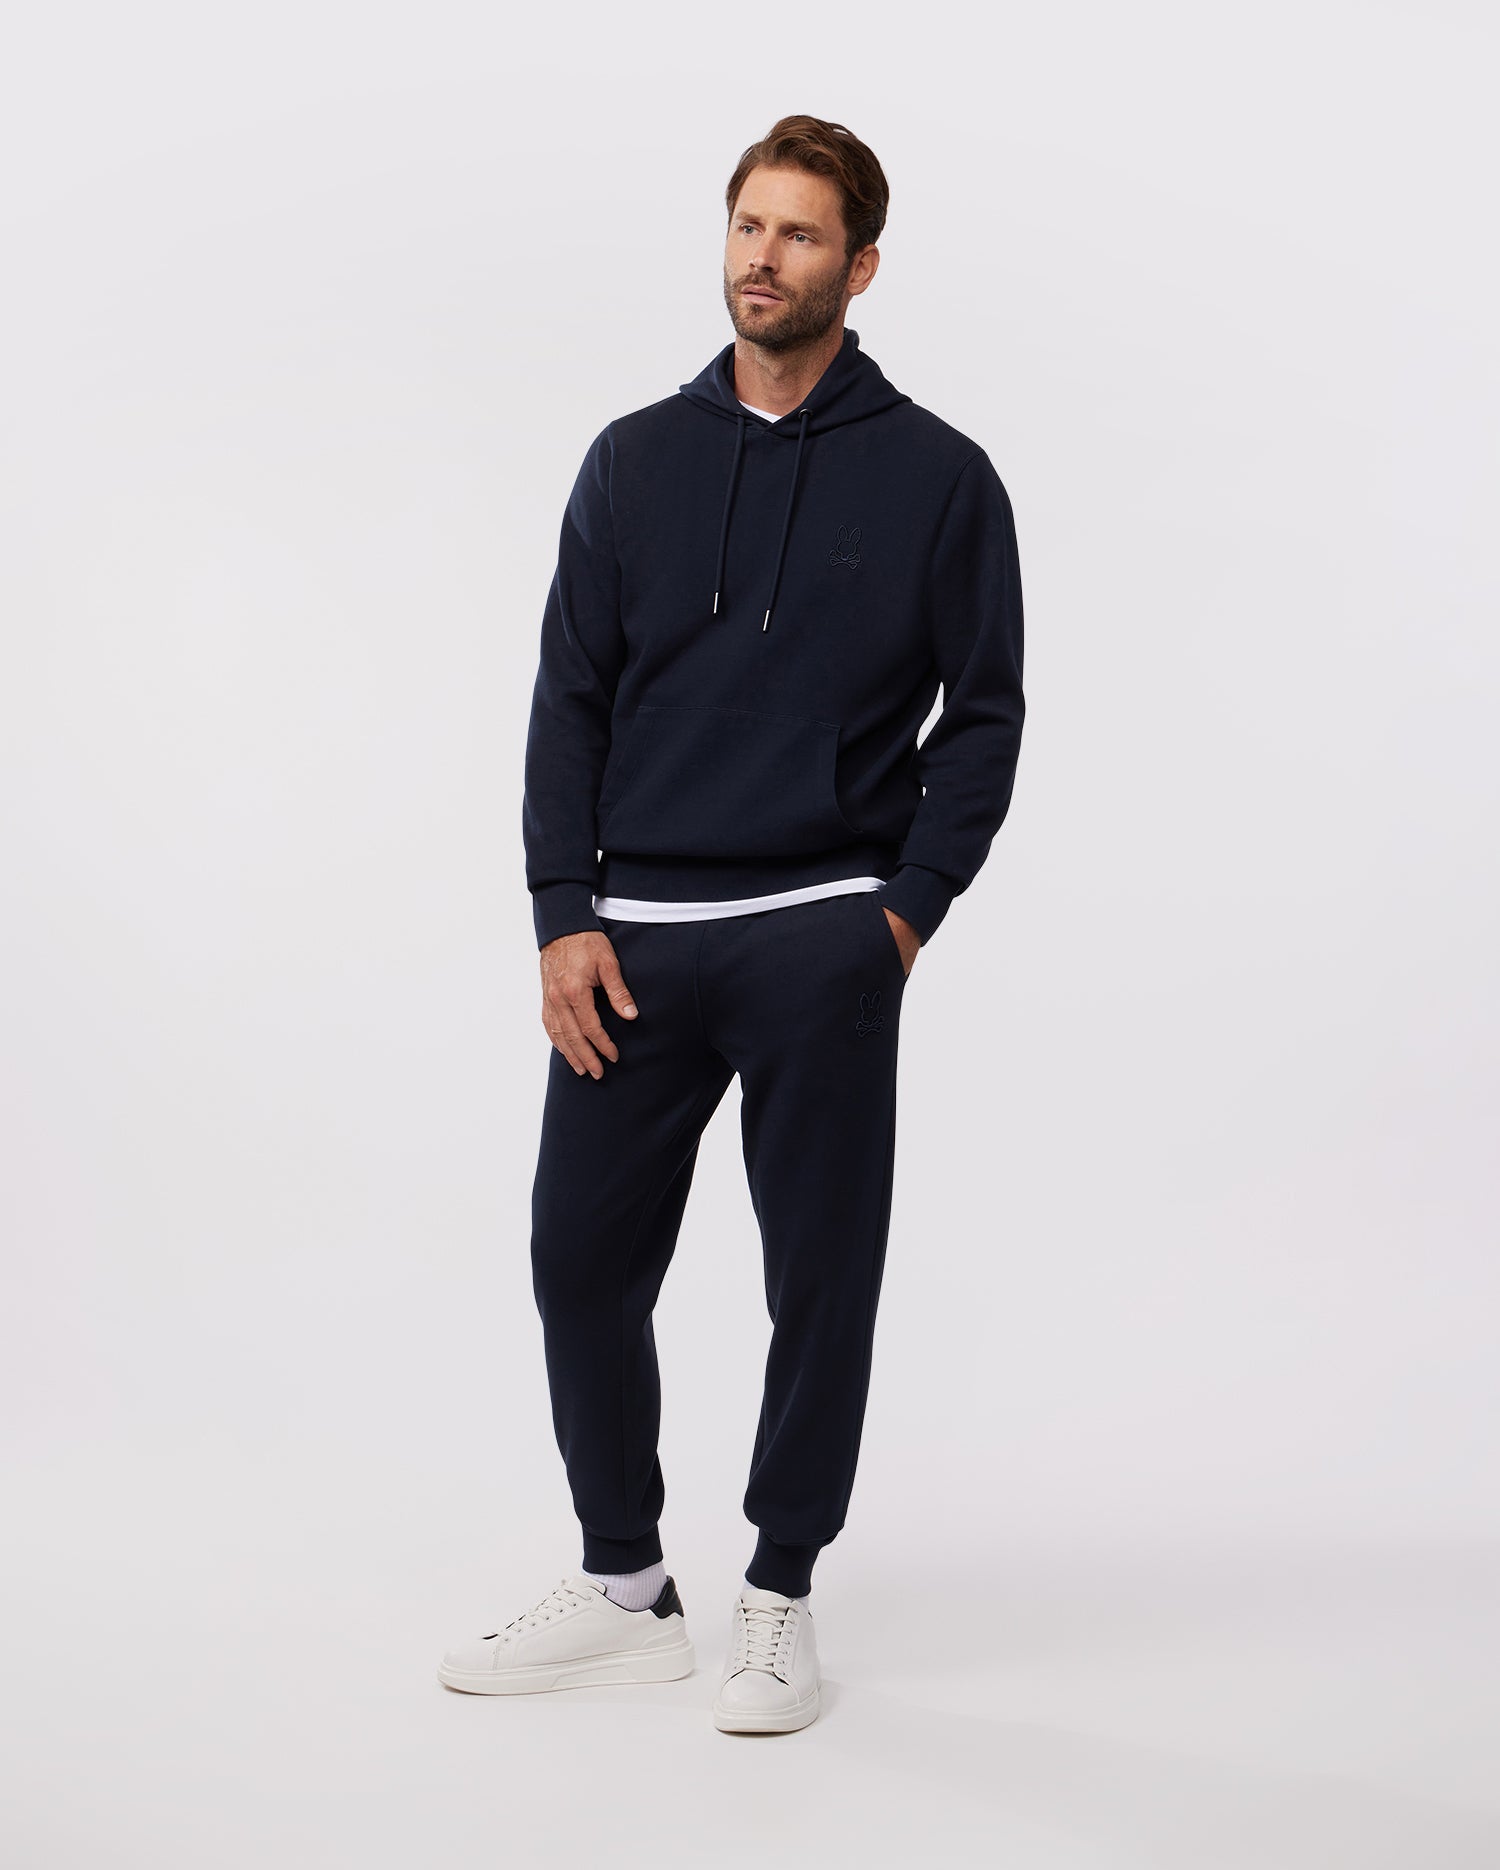 MENS OUTLINE NAVY BLUE PULLOVER HOODIE | PSYCHO BUNNY – Psycho Bunny